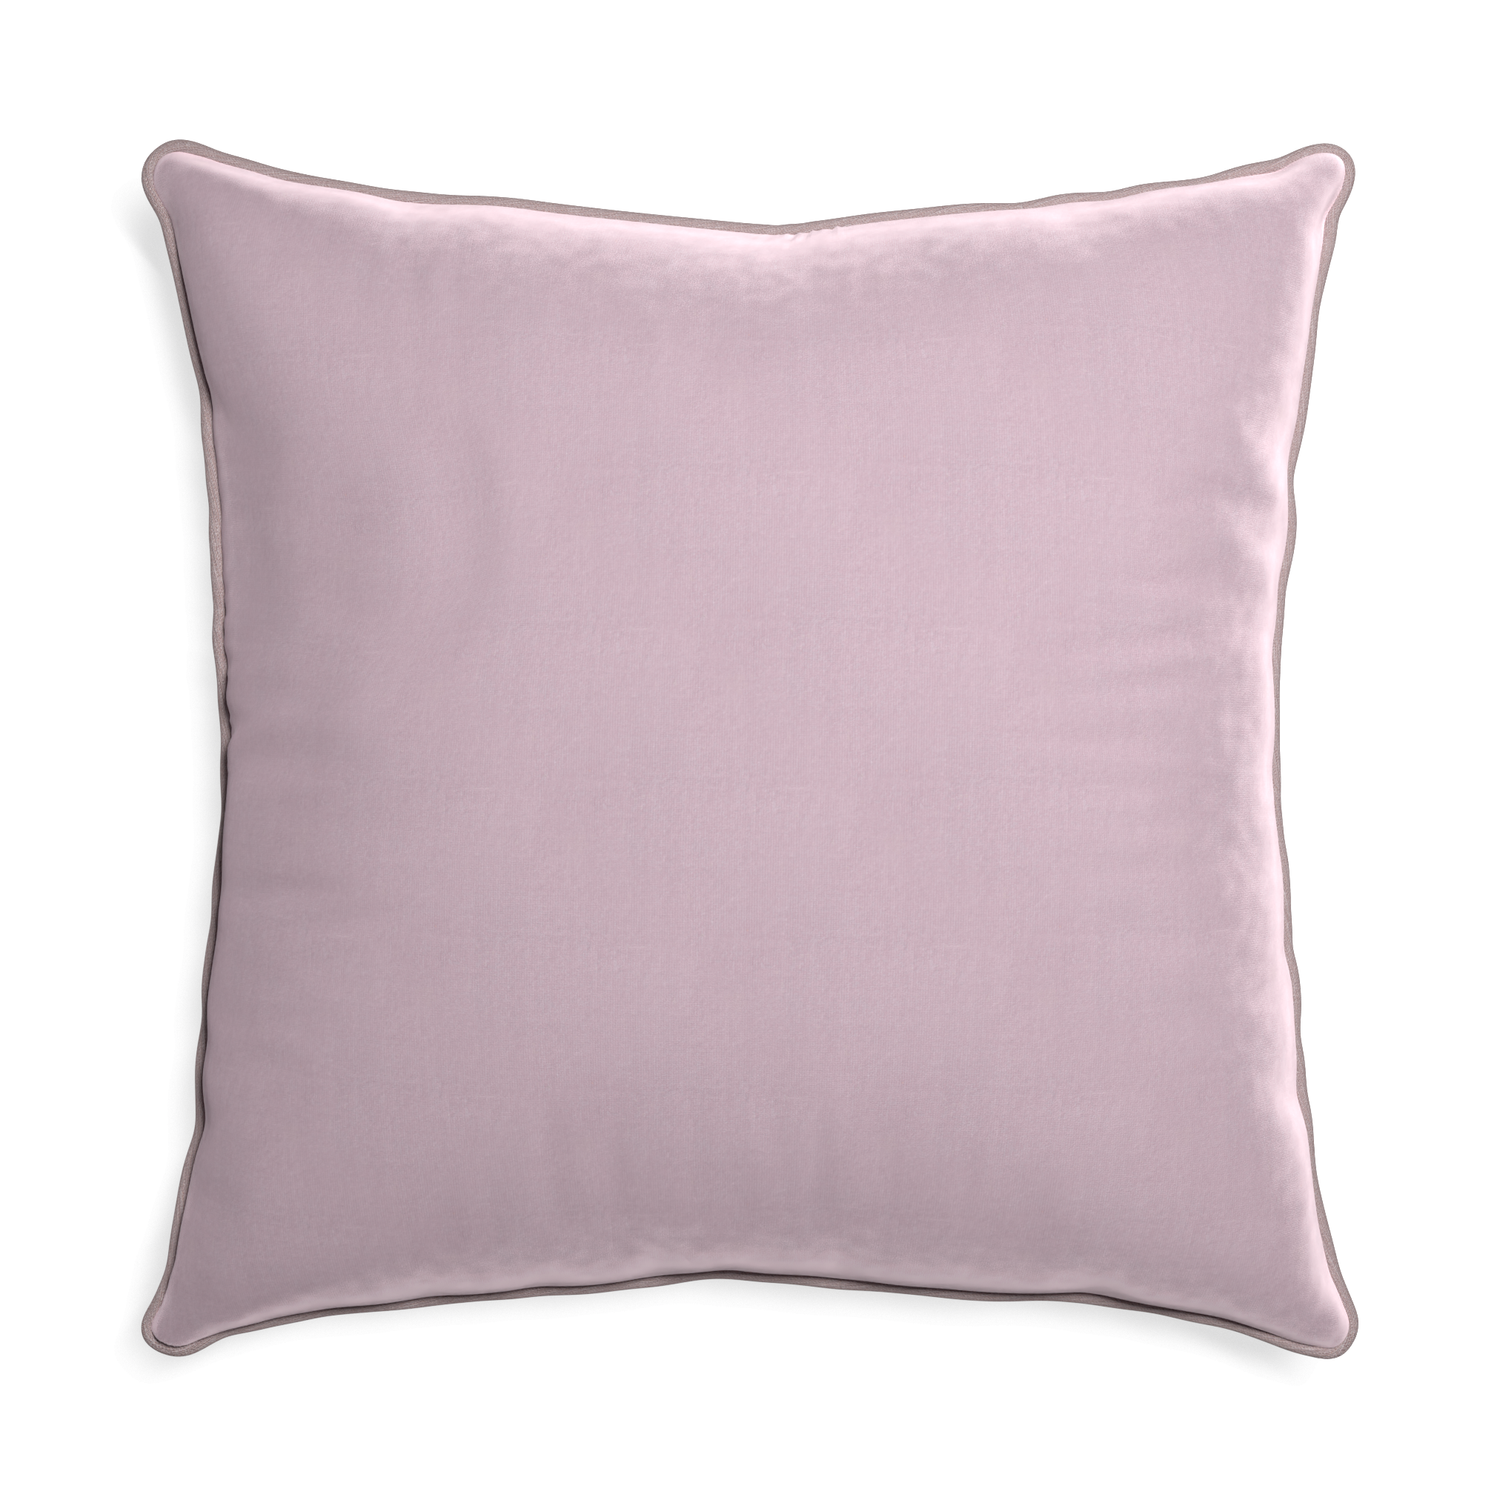 Euro-sham lilac velvet custom lilacpillow with orchid piping on white background